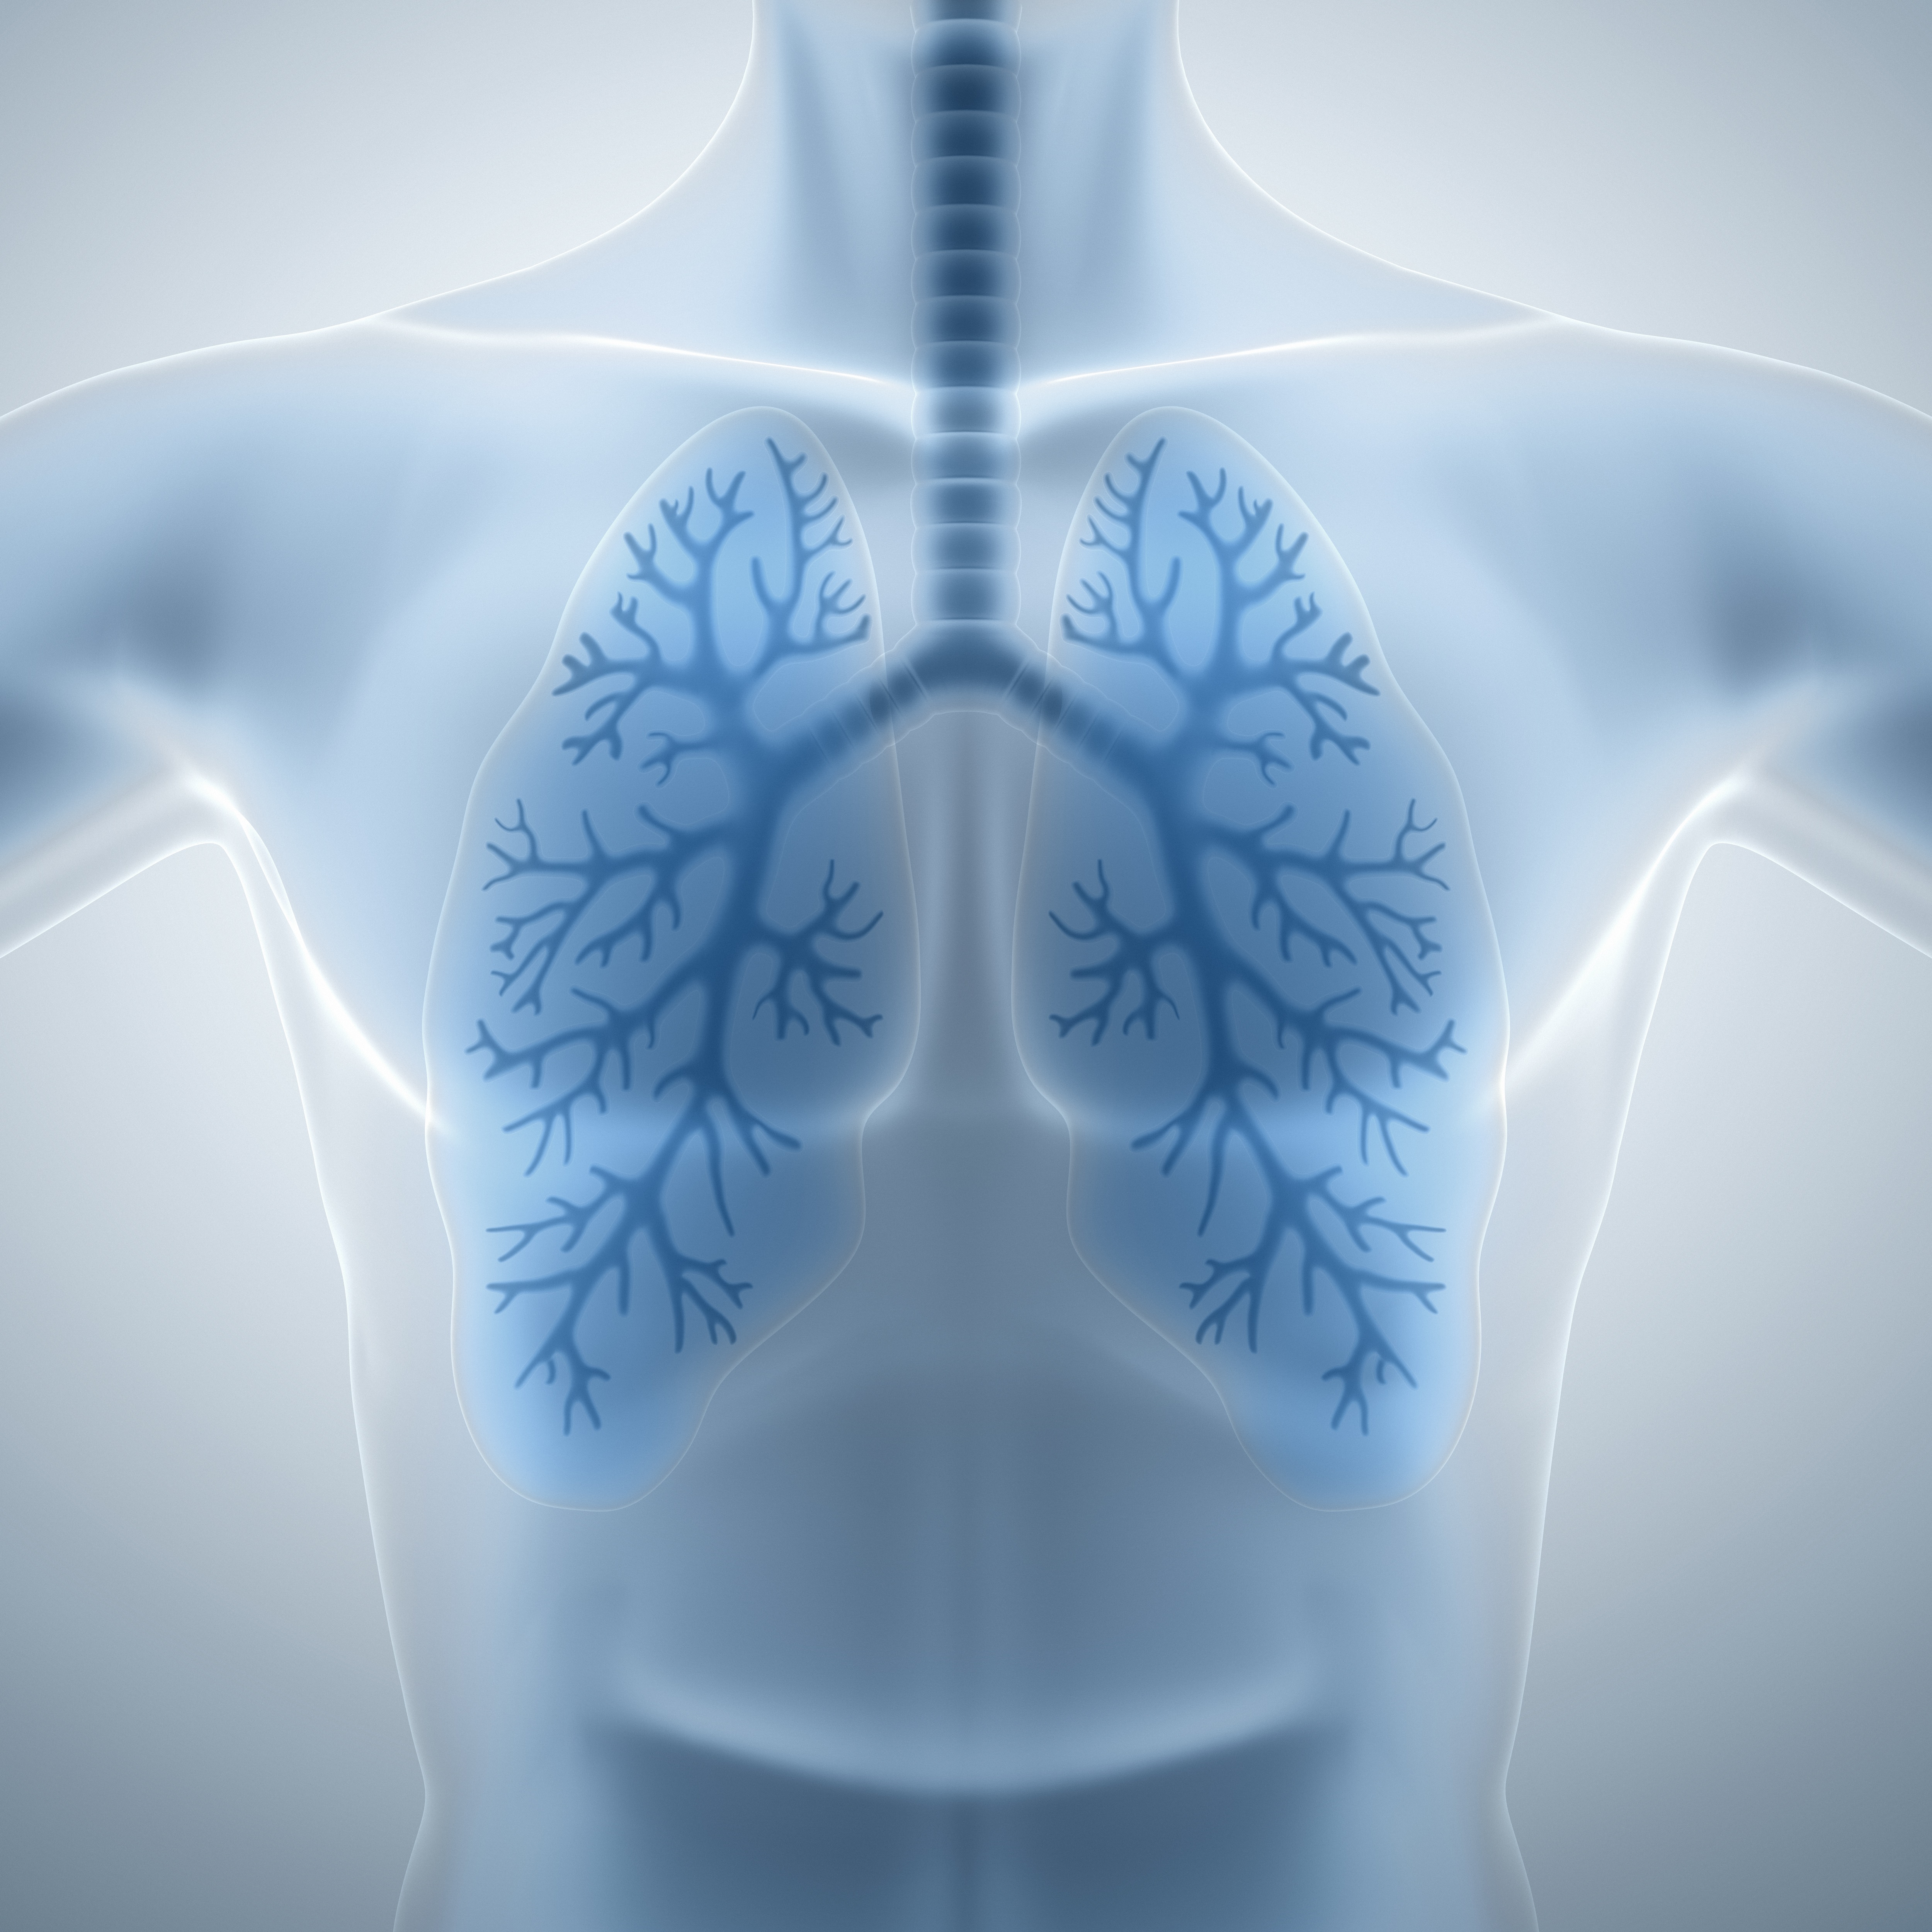 RestorGenex Presents Results of Experimental Idiopathic Pulmonary Fibrosis Therapy